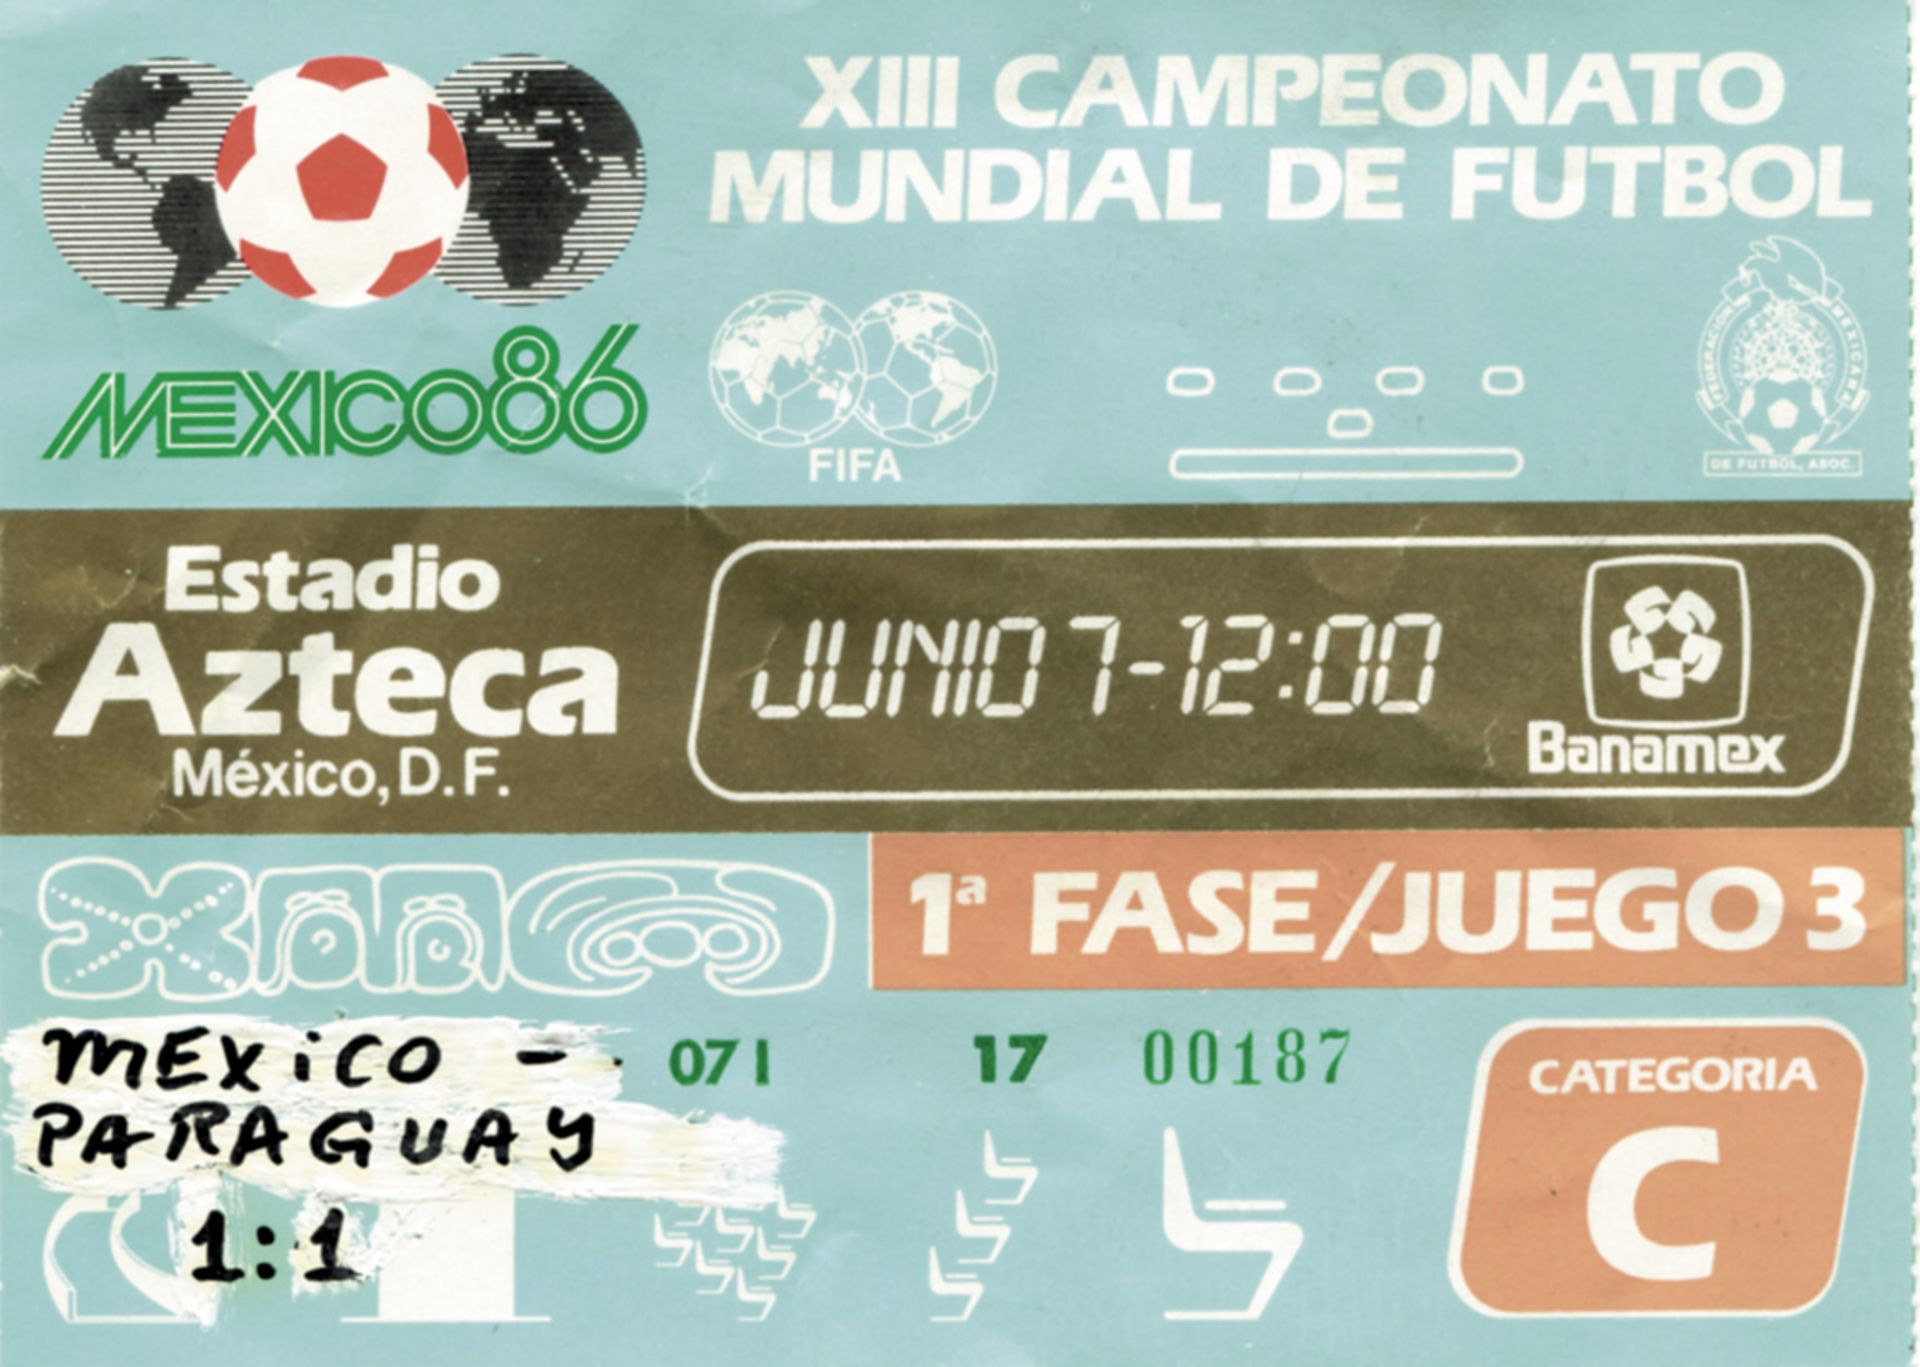 Ticket: World Cup 1986 Mexico v Paraguay - Group match: Mexico - Paraguay (1 - 1) on June 7, 1986 in